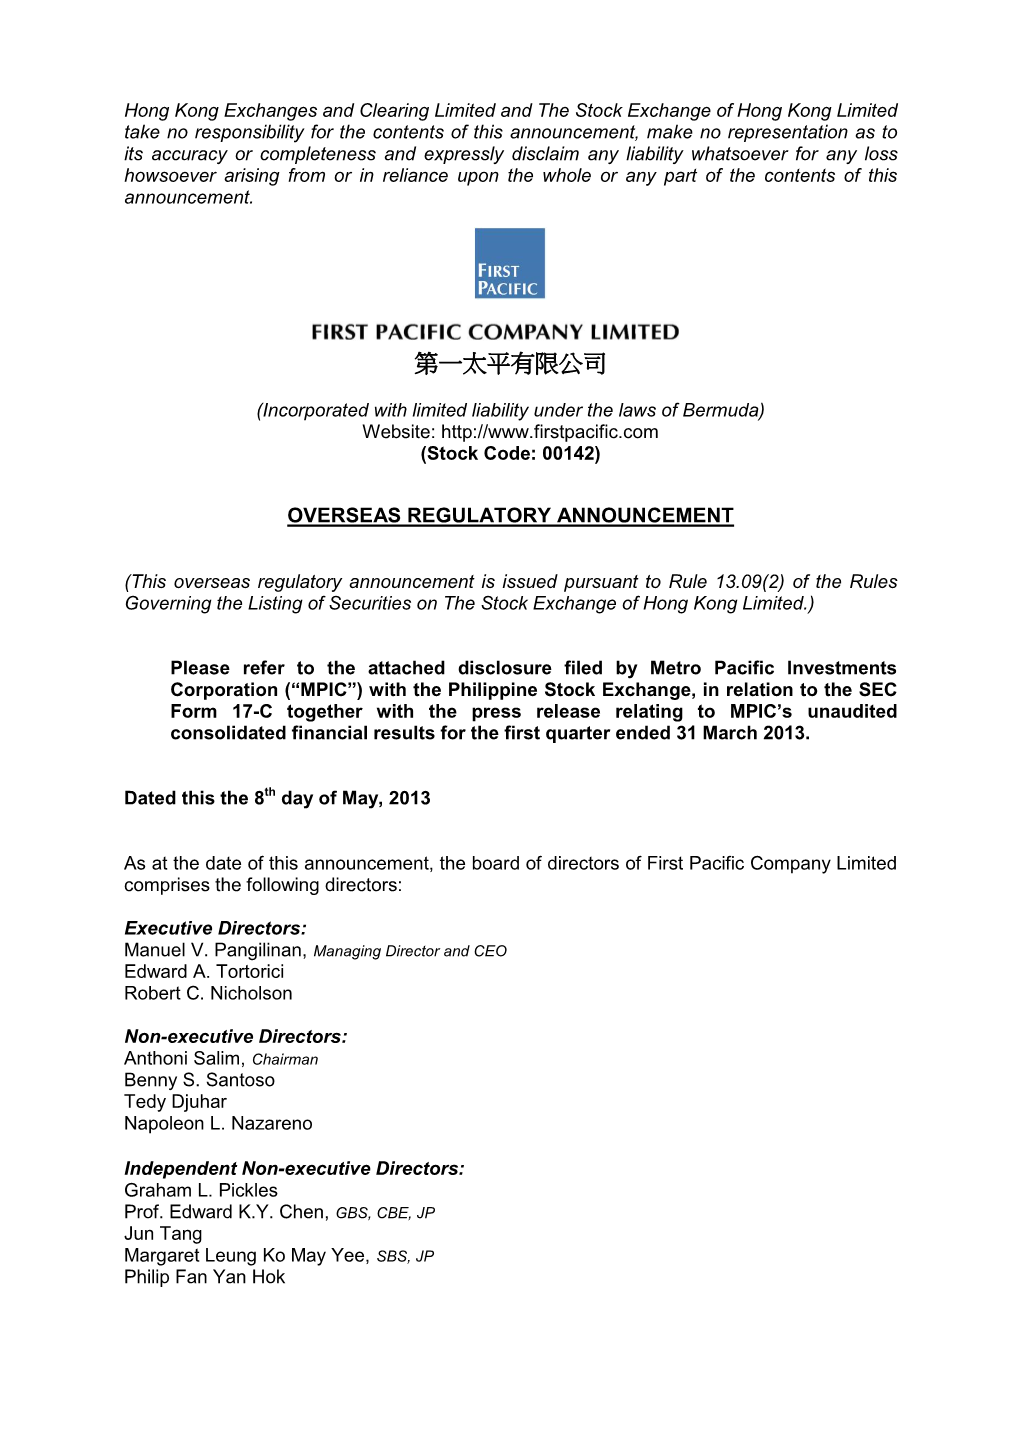 Disclosure Filed by Metro Pacific Investments Corporation ("MPIC")